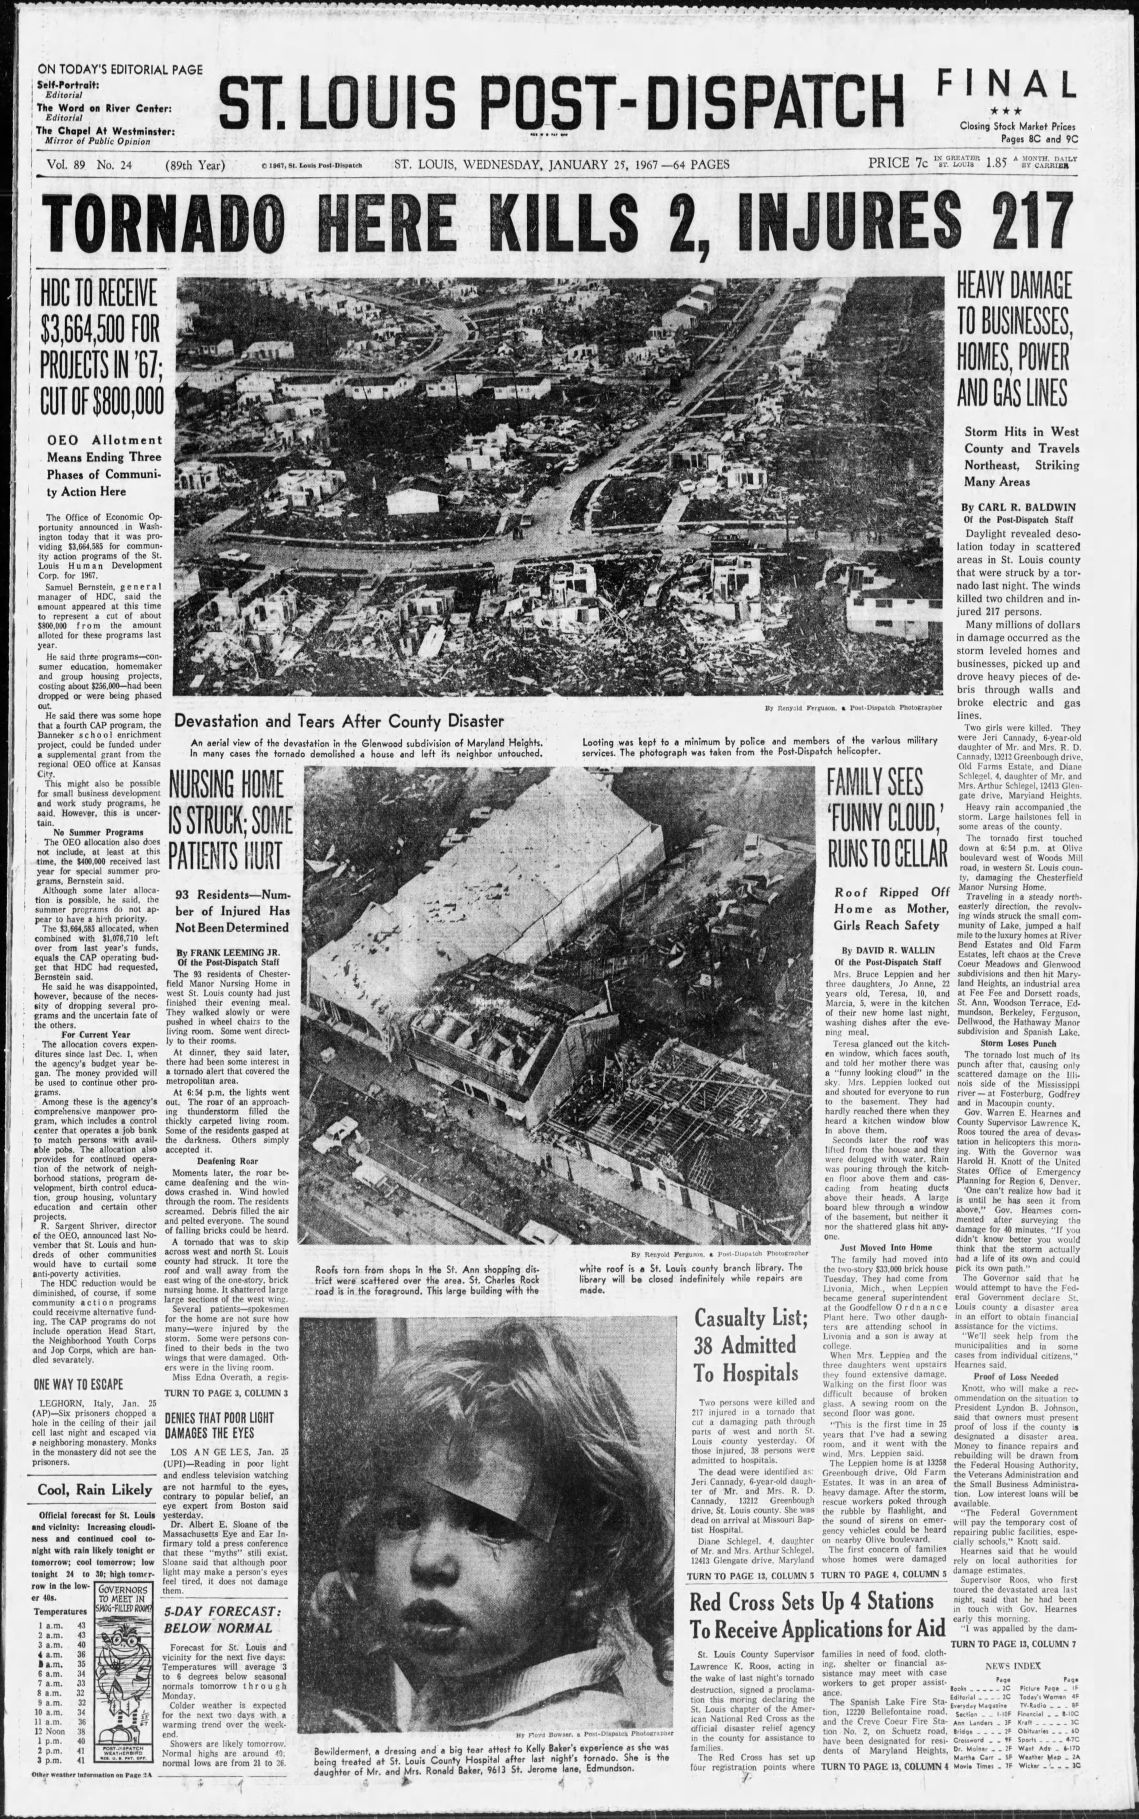 Post-Dispatch pages: The Tornado of 1967 | Post-Dispatch Archives | www.bagsaleusa.com